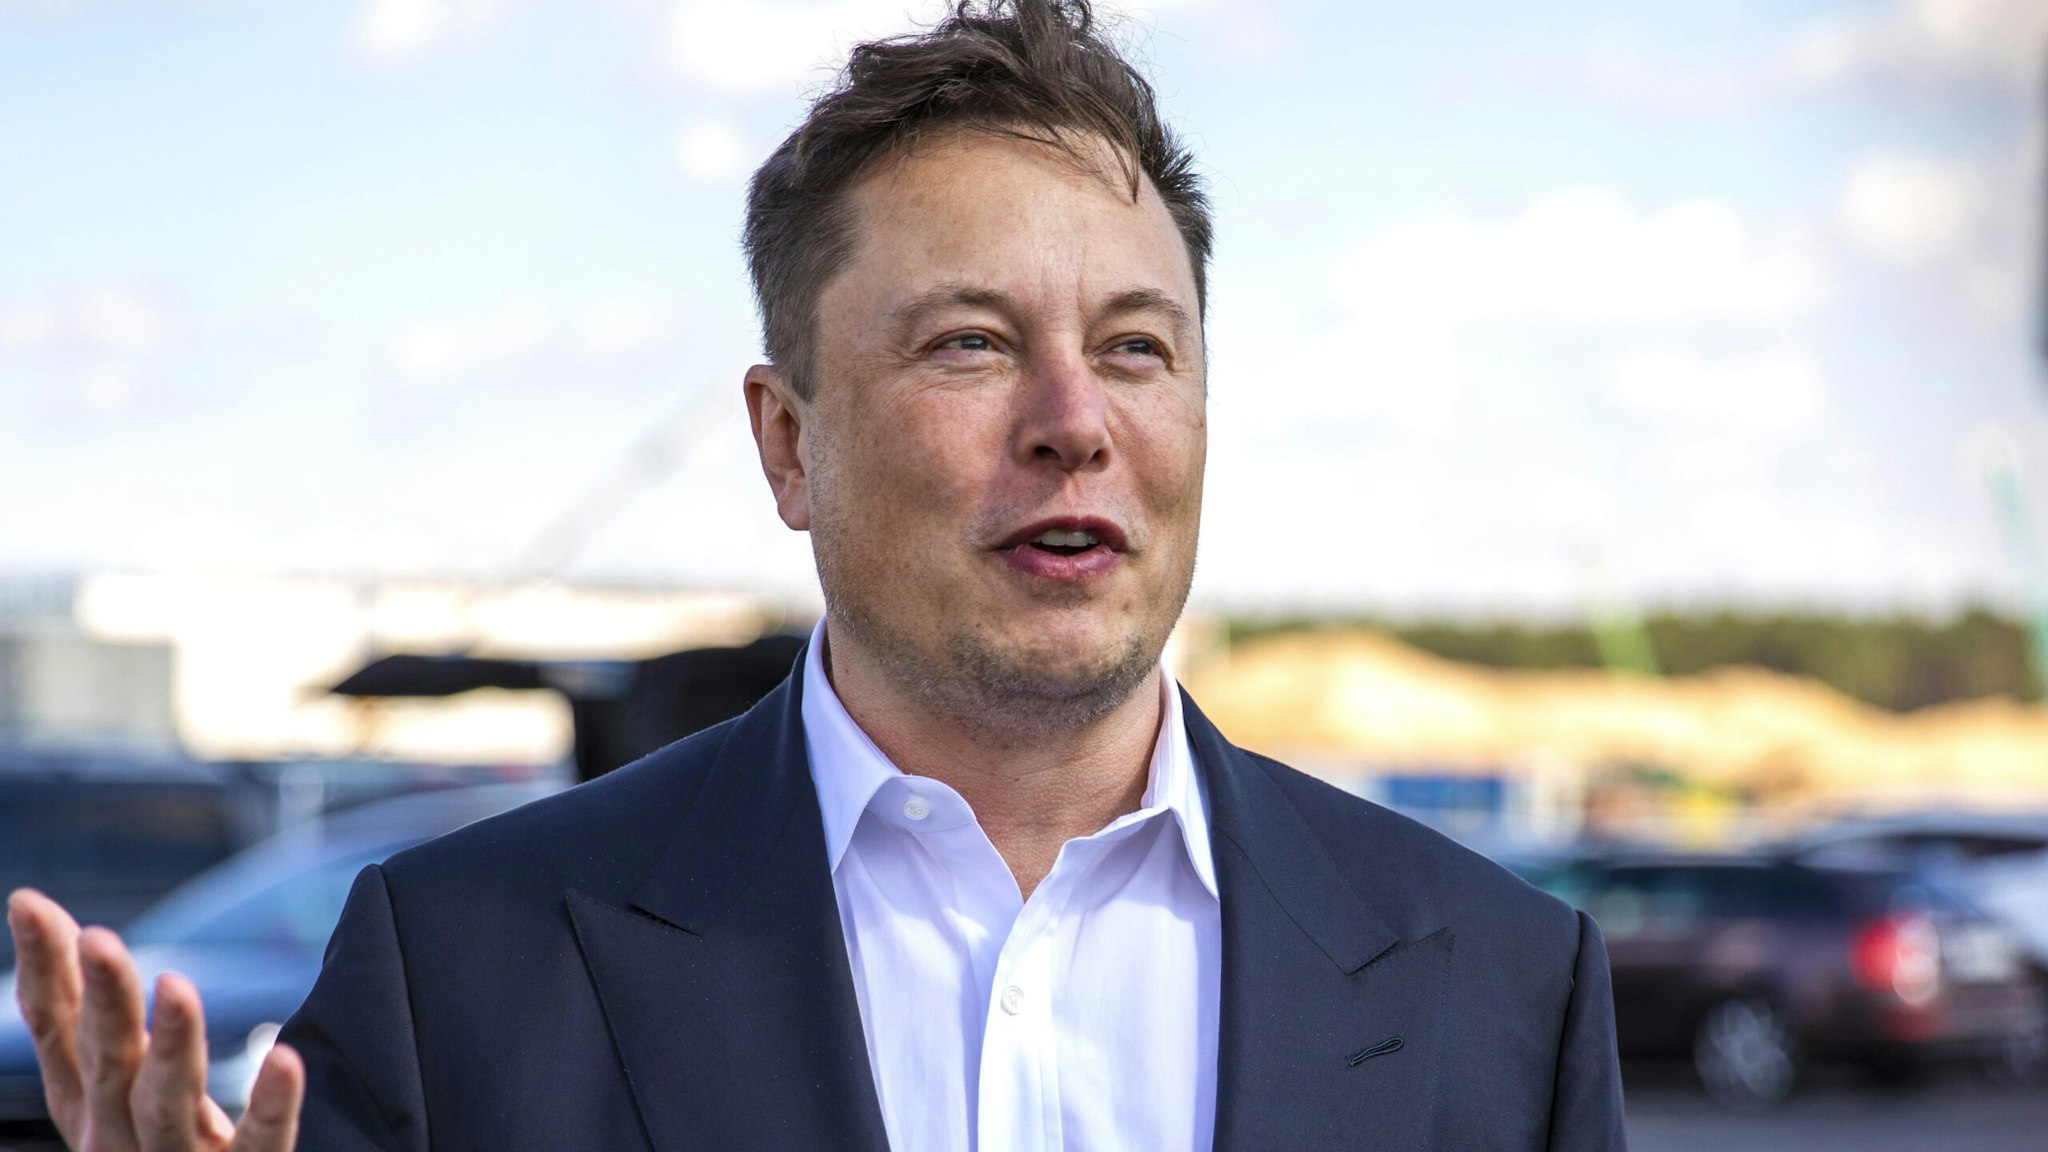 FUERSTENWALDE, GERMANY - SEPTEMBER 03: Tesla head Elon Musk arrives to have a look at the construction site of the new Tesla Gigafactory near Berlin on September 03, 2020 near Gruenheide, Germany. Musk is currently in Germany where he met with vaccine maker CureVac on Tuesday, with which Tesla has a cooperation to build devices for producing RNA vaccines, as well as German Economy Minister Peter Altmaier yesterday.